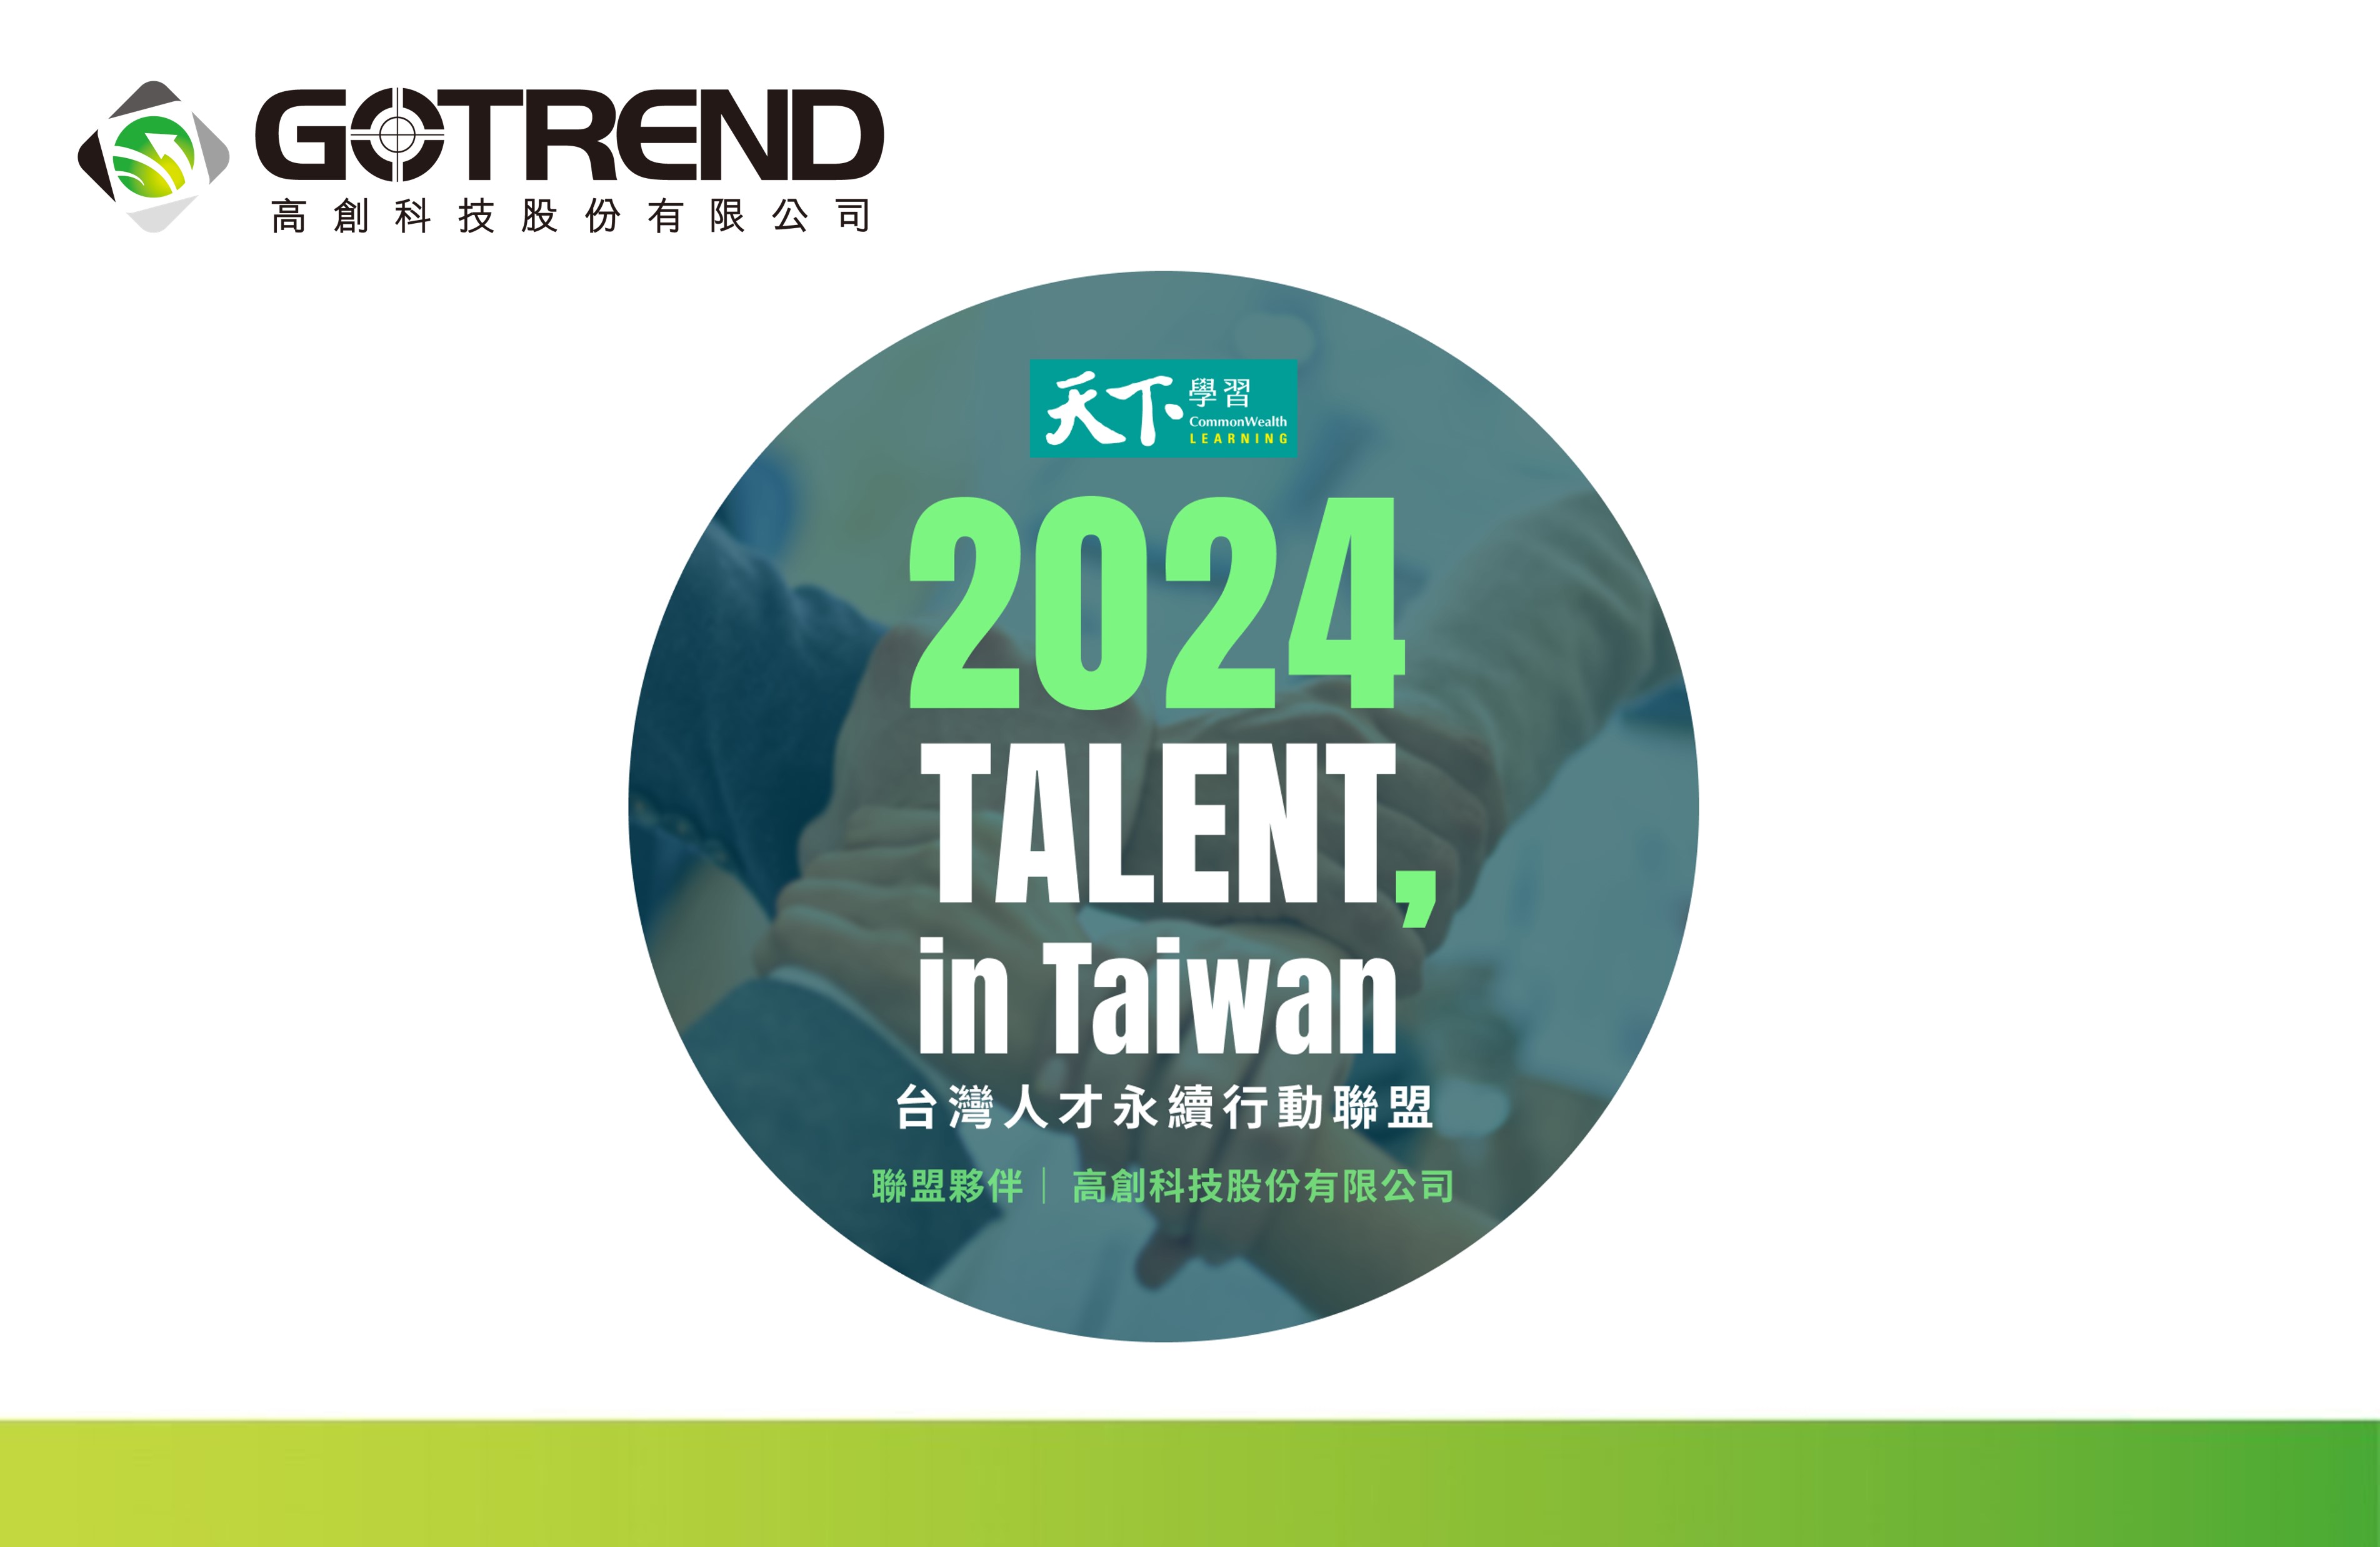 At GOTREND, the cultivation and development of talent have consistently been integral to our operational goals. In response to the ESG talent sustainability and DEI trends, coupled with the global emphasis on corporate social responsibility towards talent, GOTREND is pleased to announce its renewed participation in the 